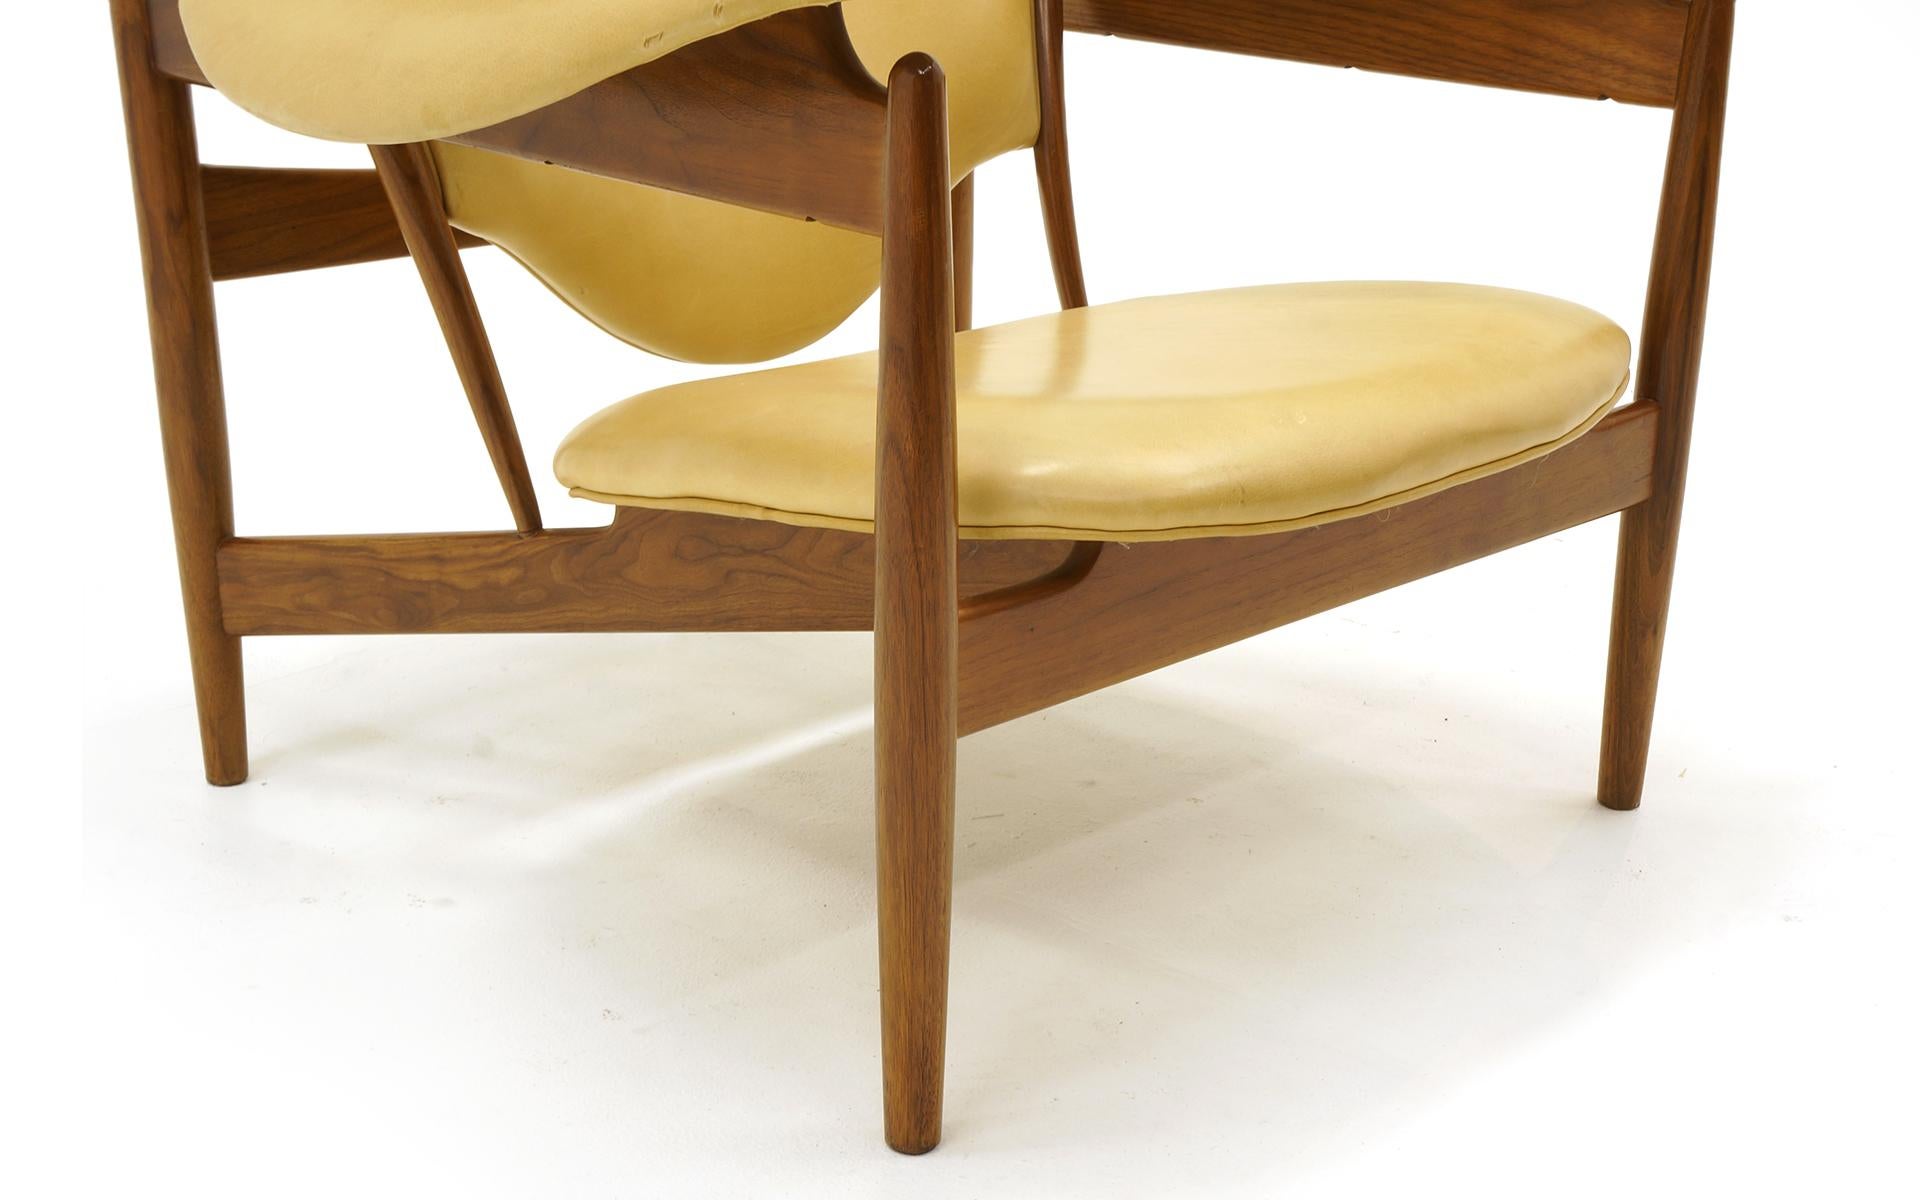 American Chieftain Chair by Finn Juhl for Baker, Walnut and Mustard Color Leather